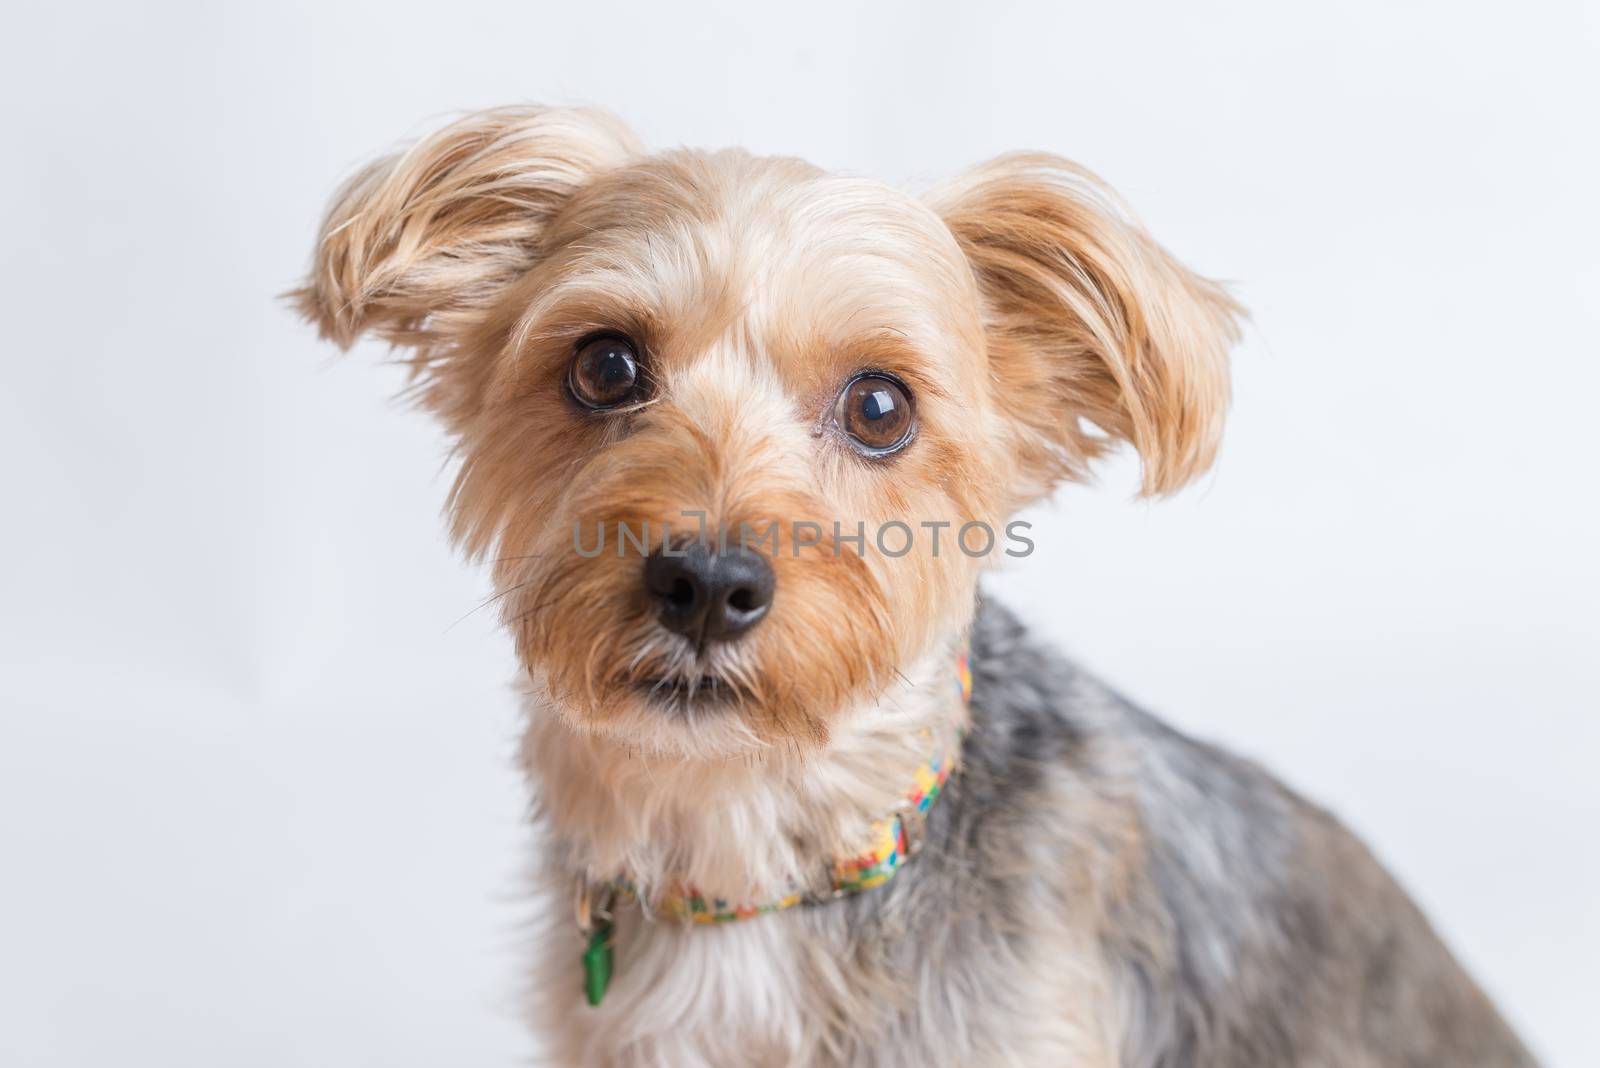 A cute yorkshire terrier looking straight at the camera on a white background.